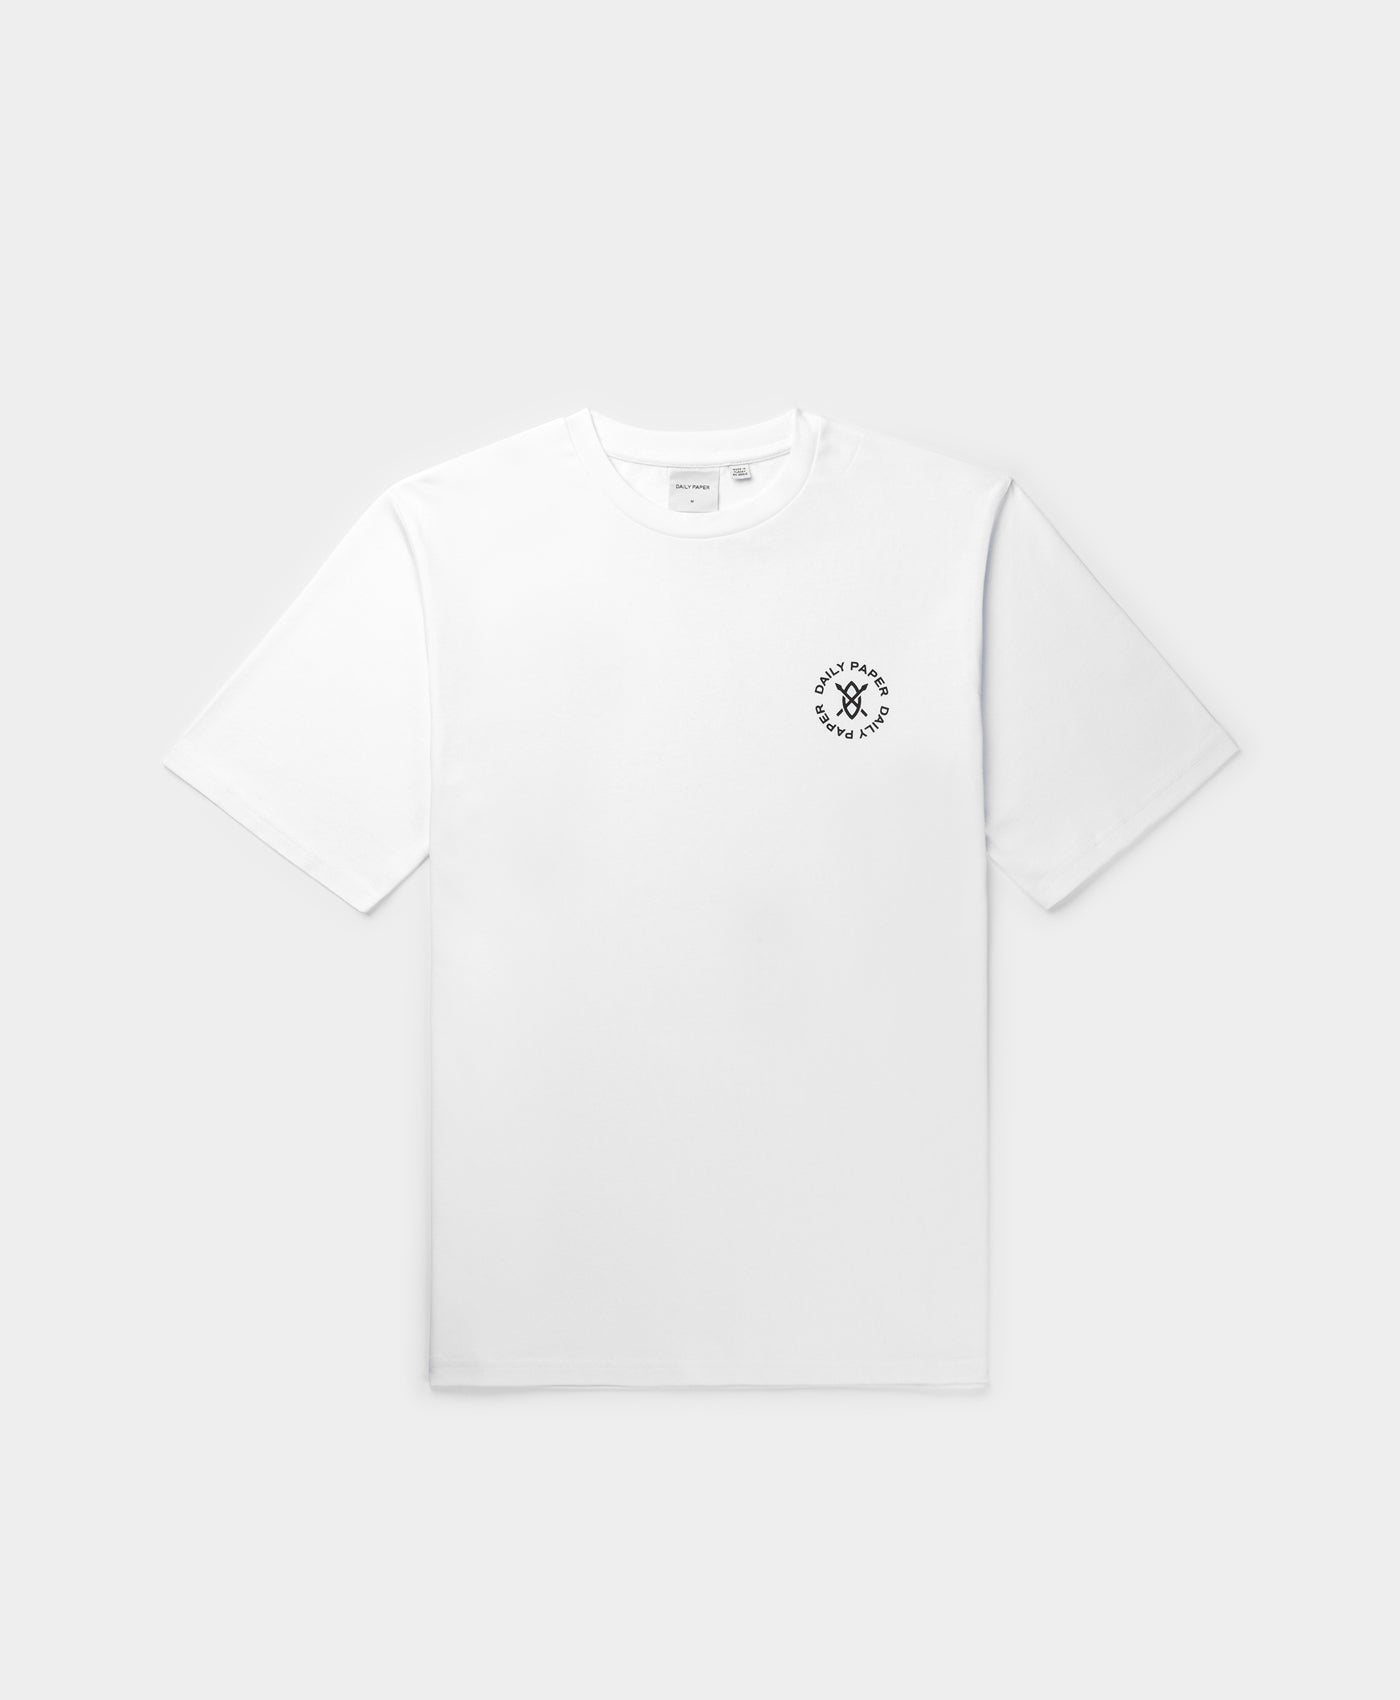 Daily Paper Men's Nerad Scattered Logo T-Shirt in White Daily Paper